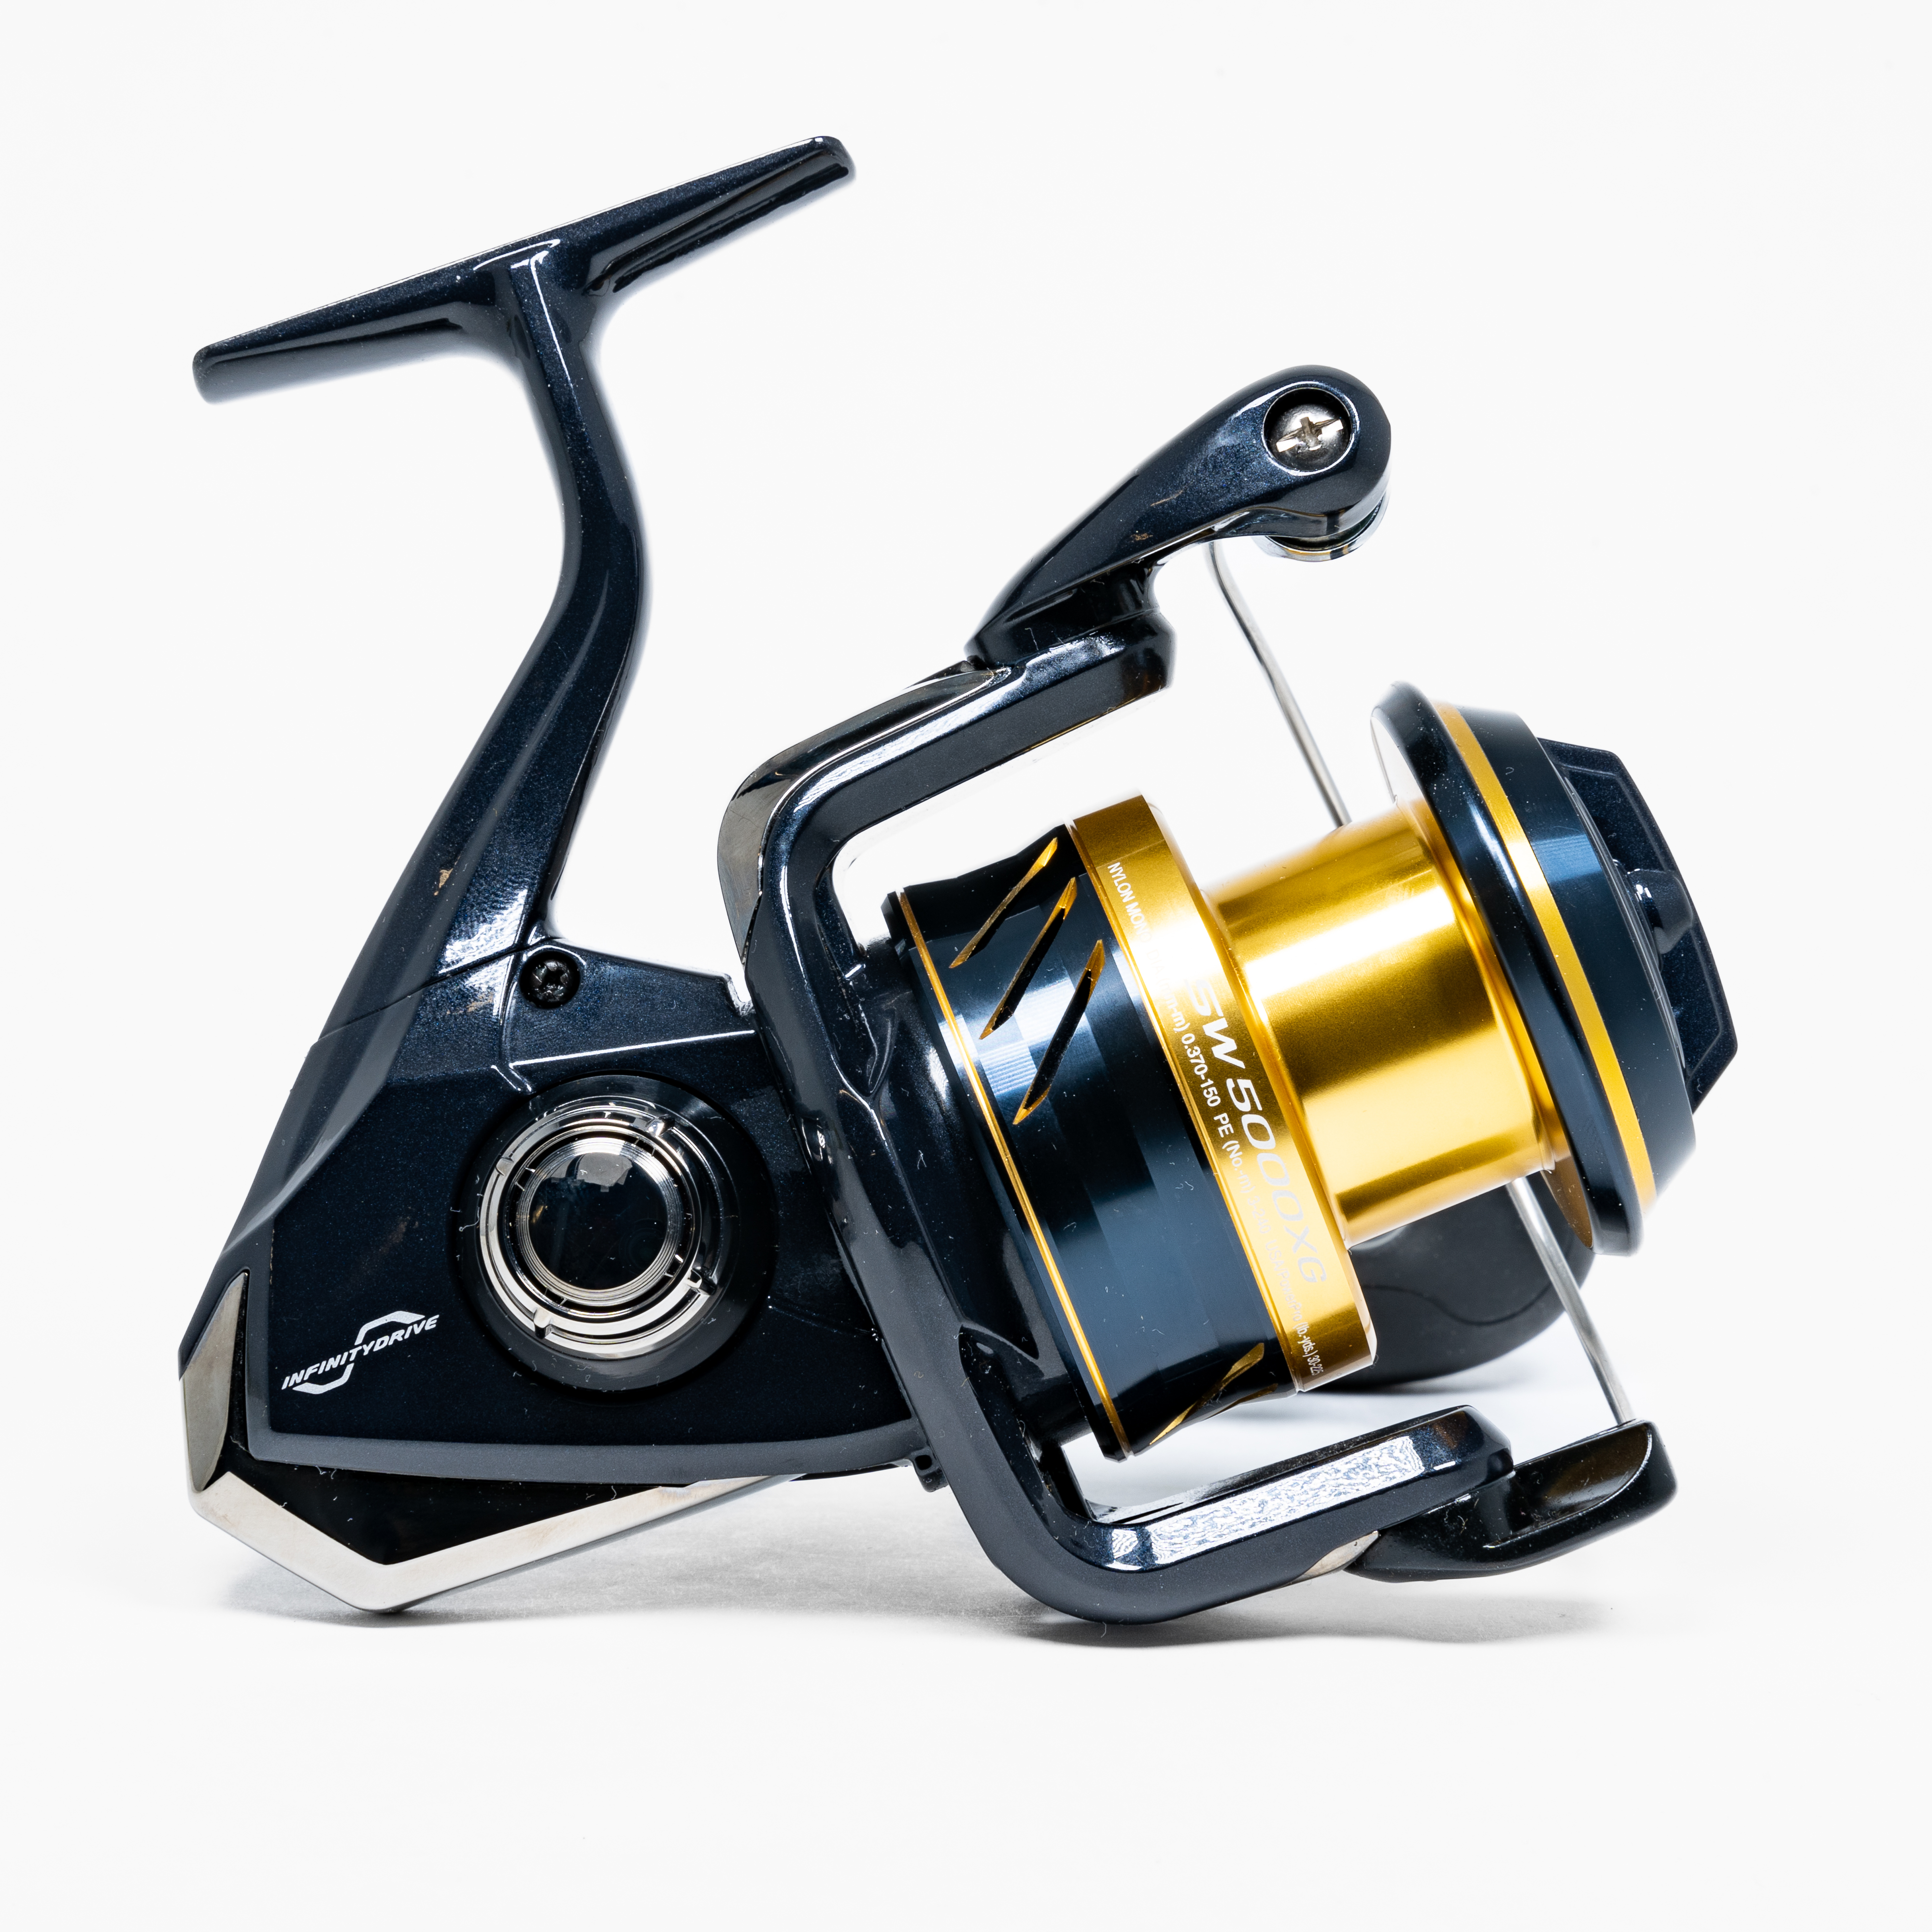 Shimano Spheros 12000fa Spinning Fishing Reel With Line for sale online 